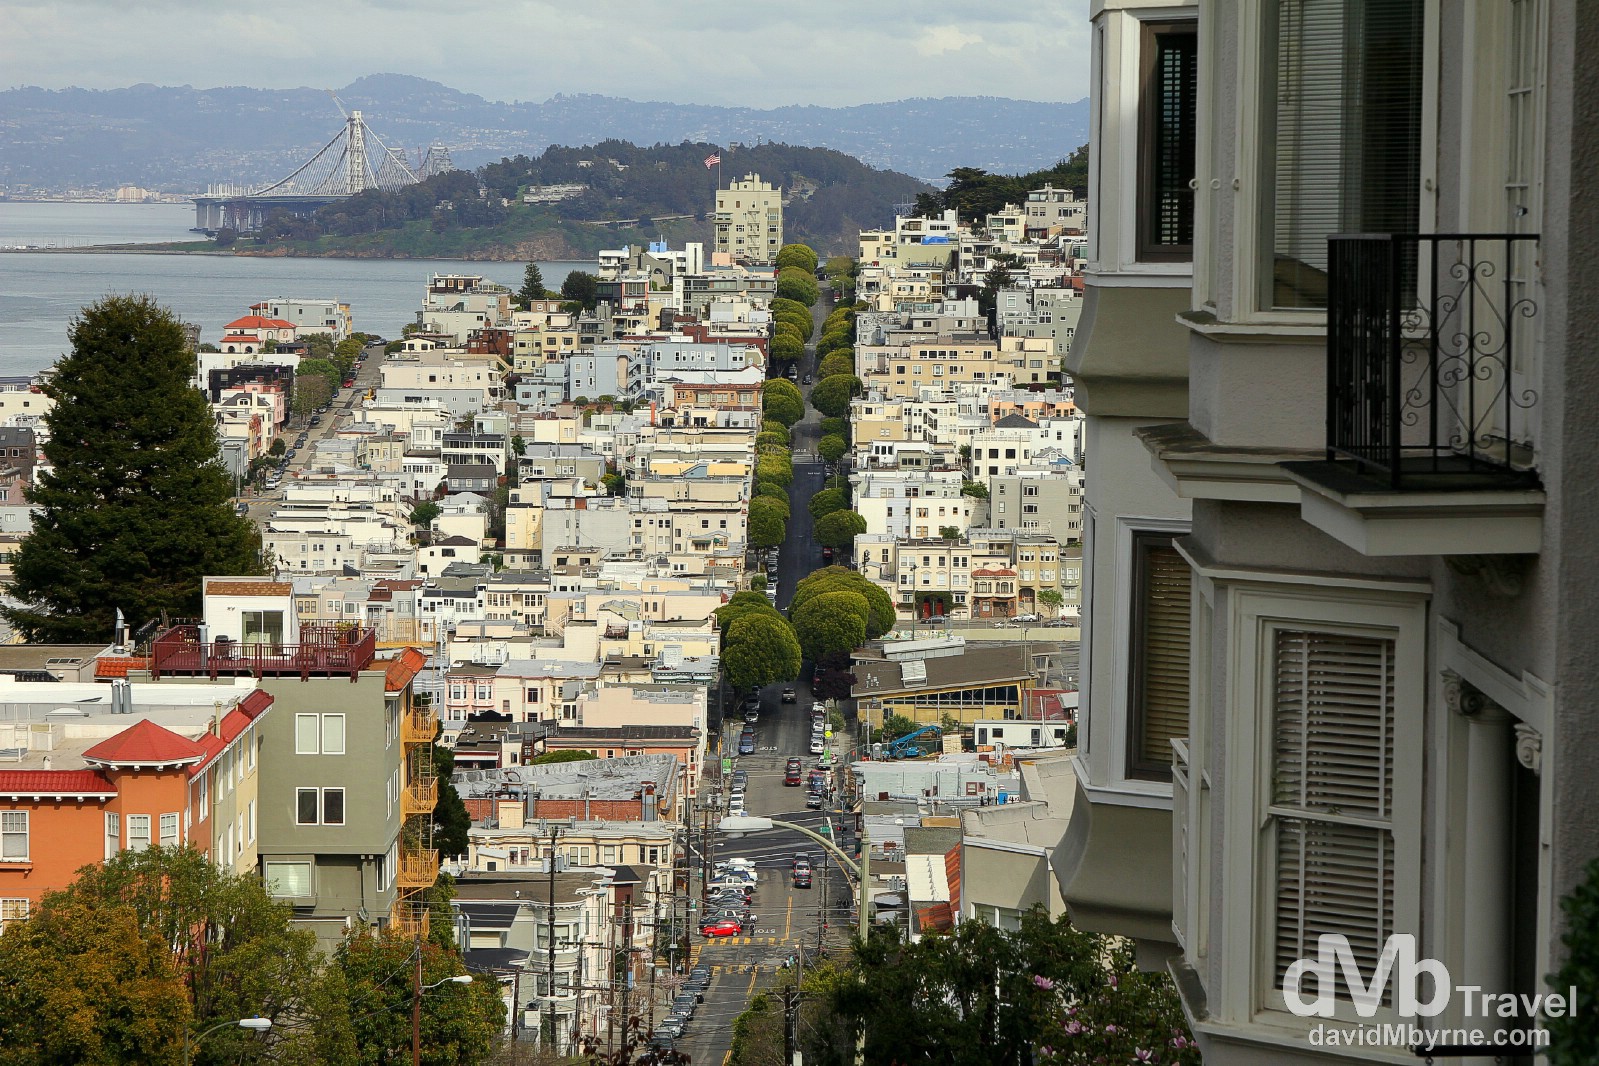 The view from Lombard Street, San Francisco, California, USA. March 31st 2013.